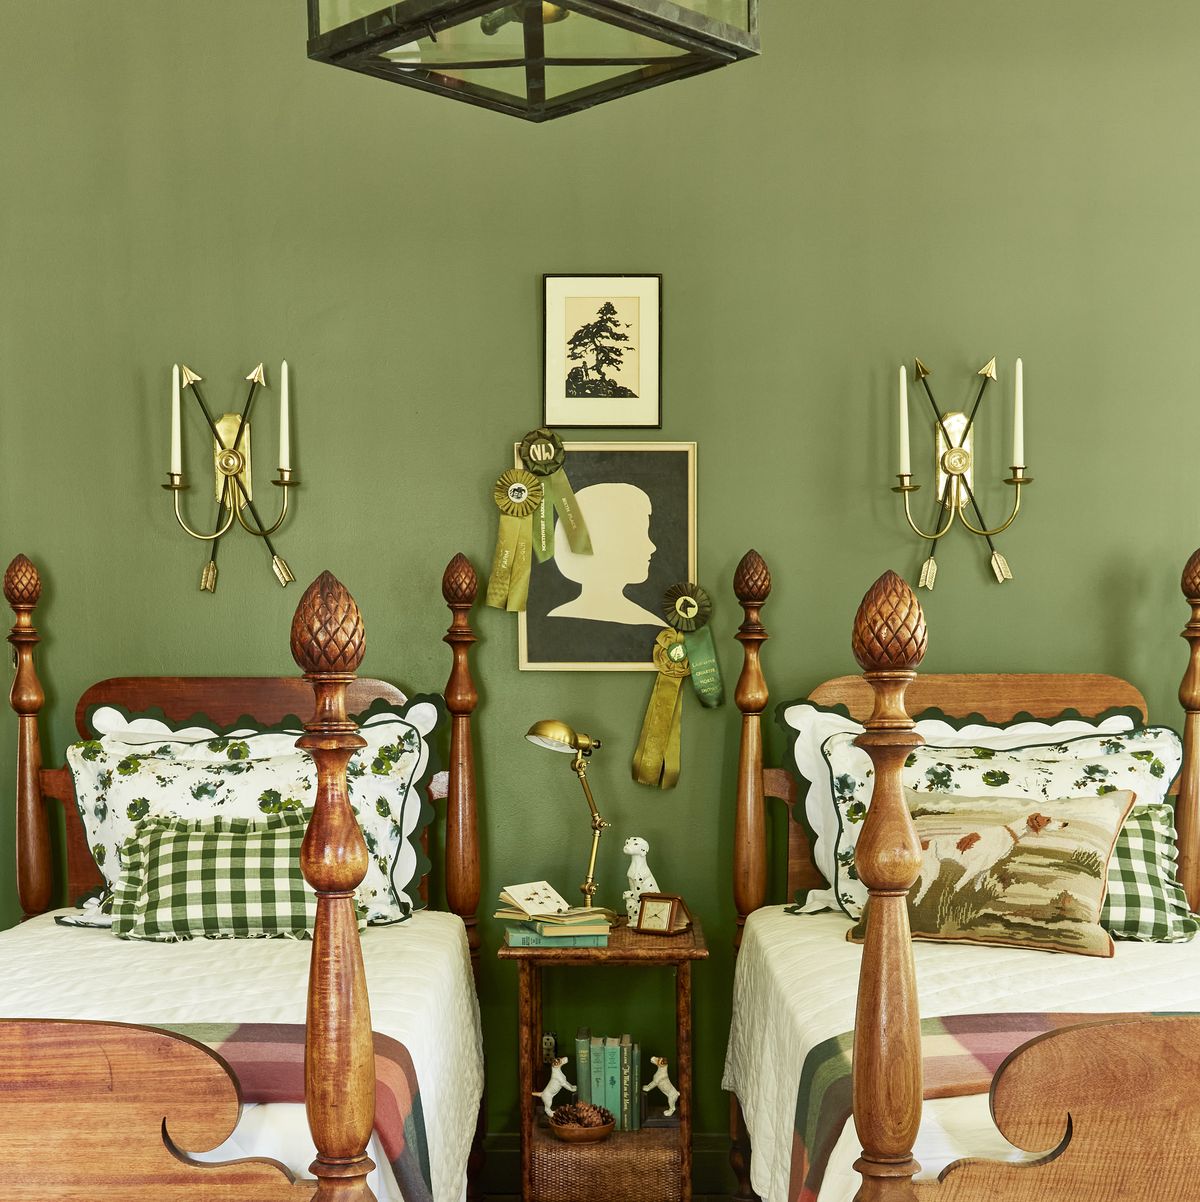 Green bedroom - 15 Earth Tone Colors For Bedroom { Shades of Green }